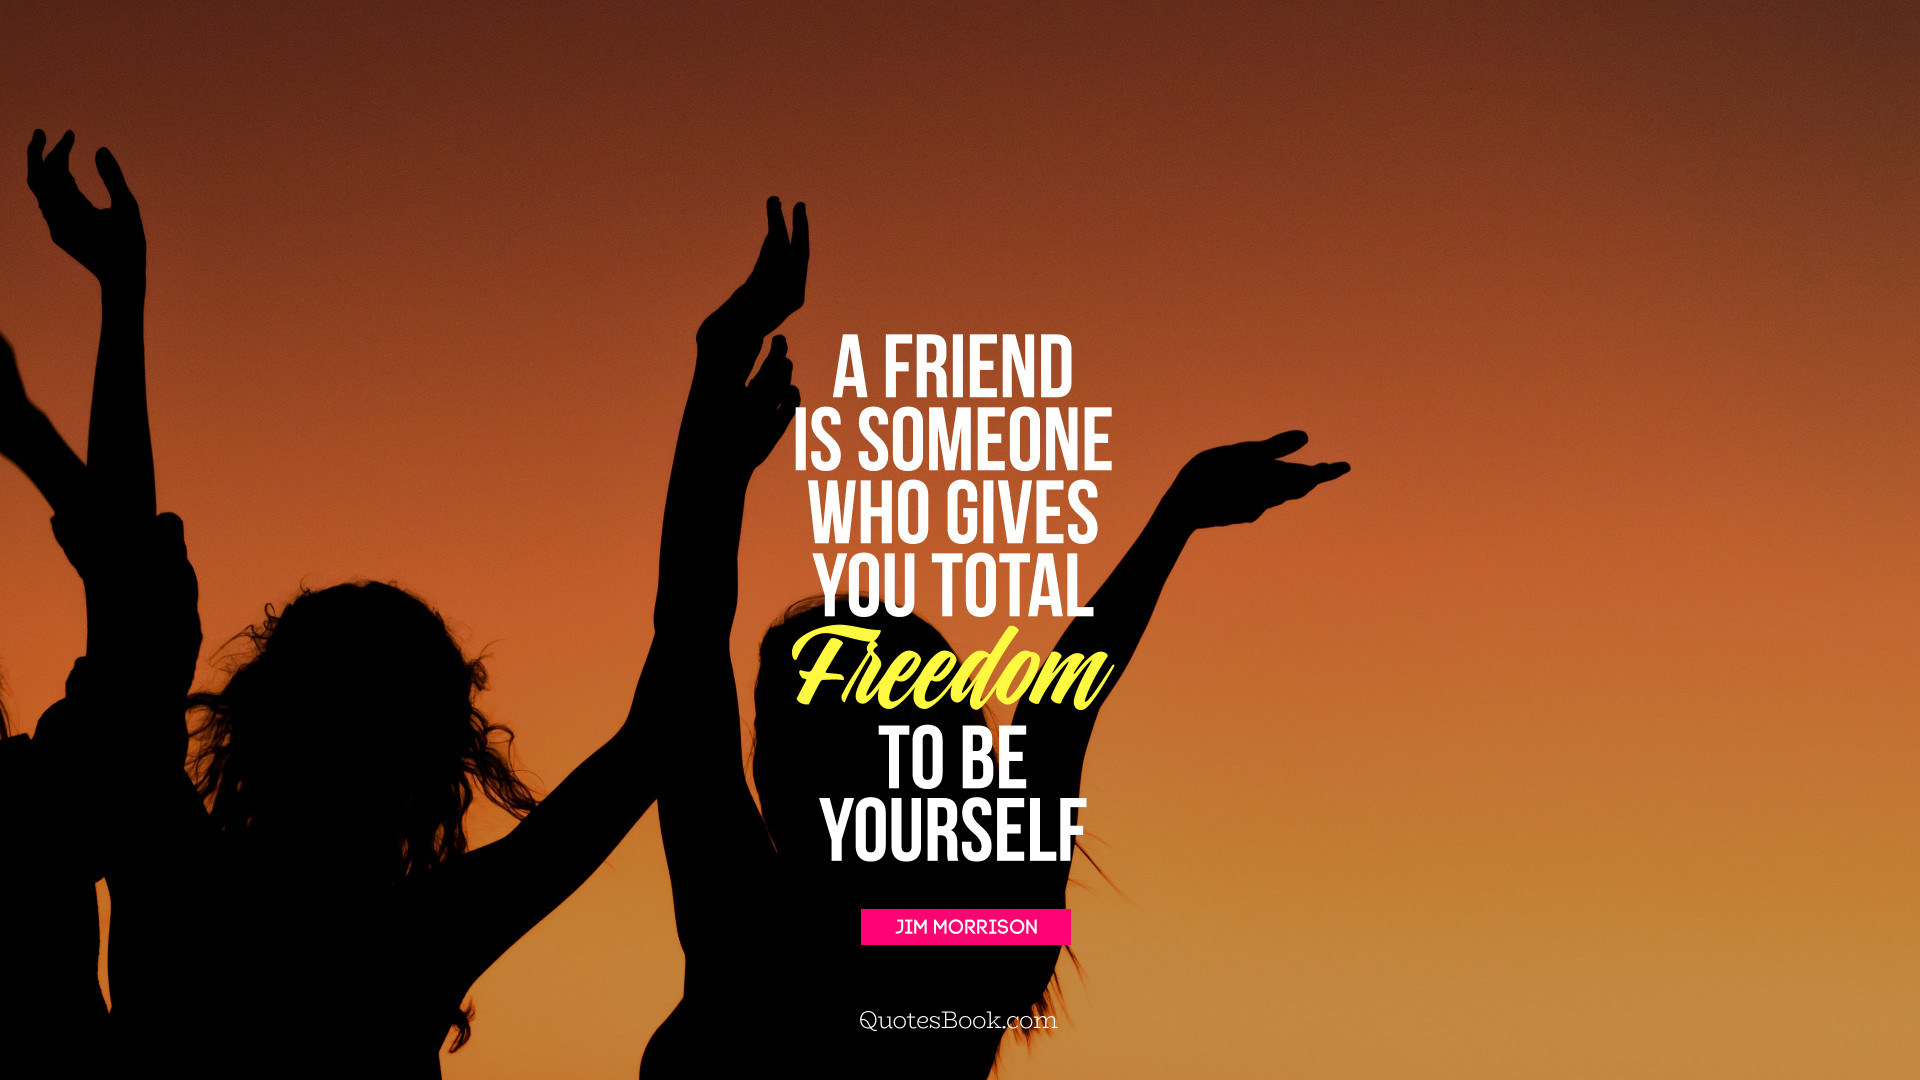 A friend is someone who gives you total freedom to be yourself. - Quote